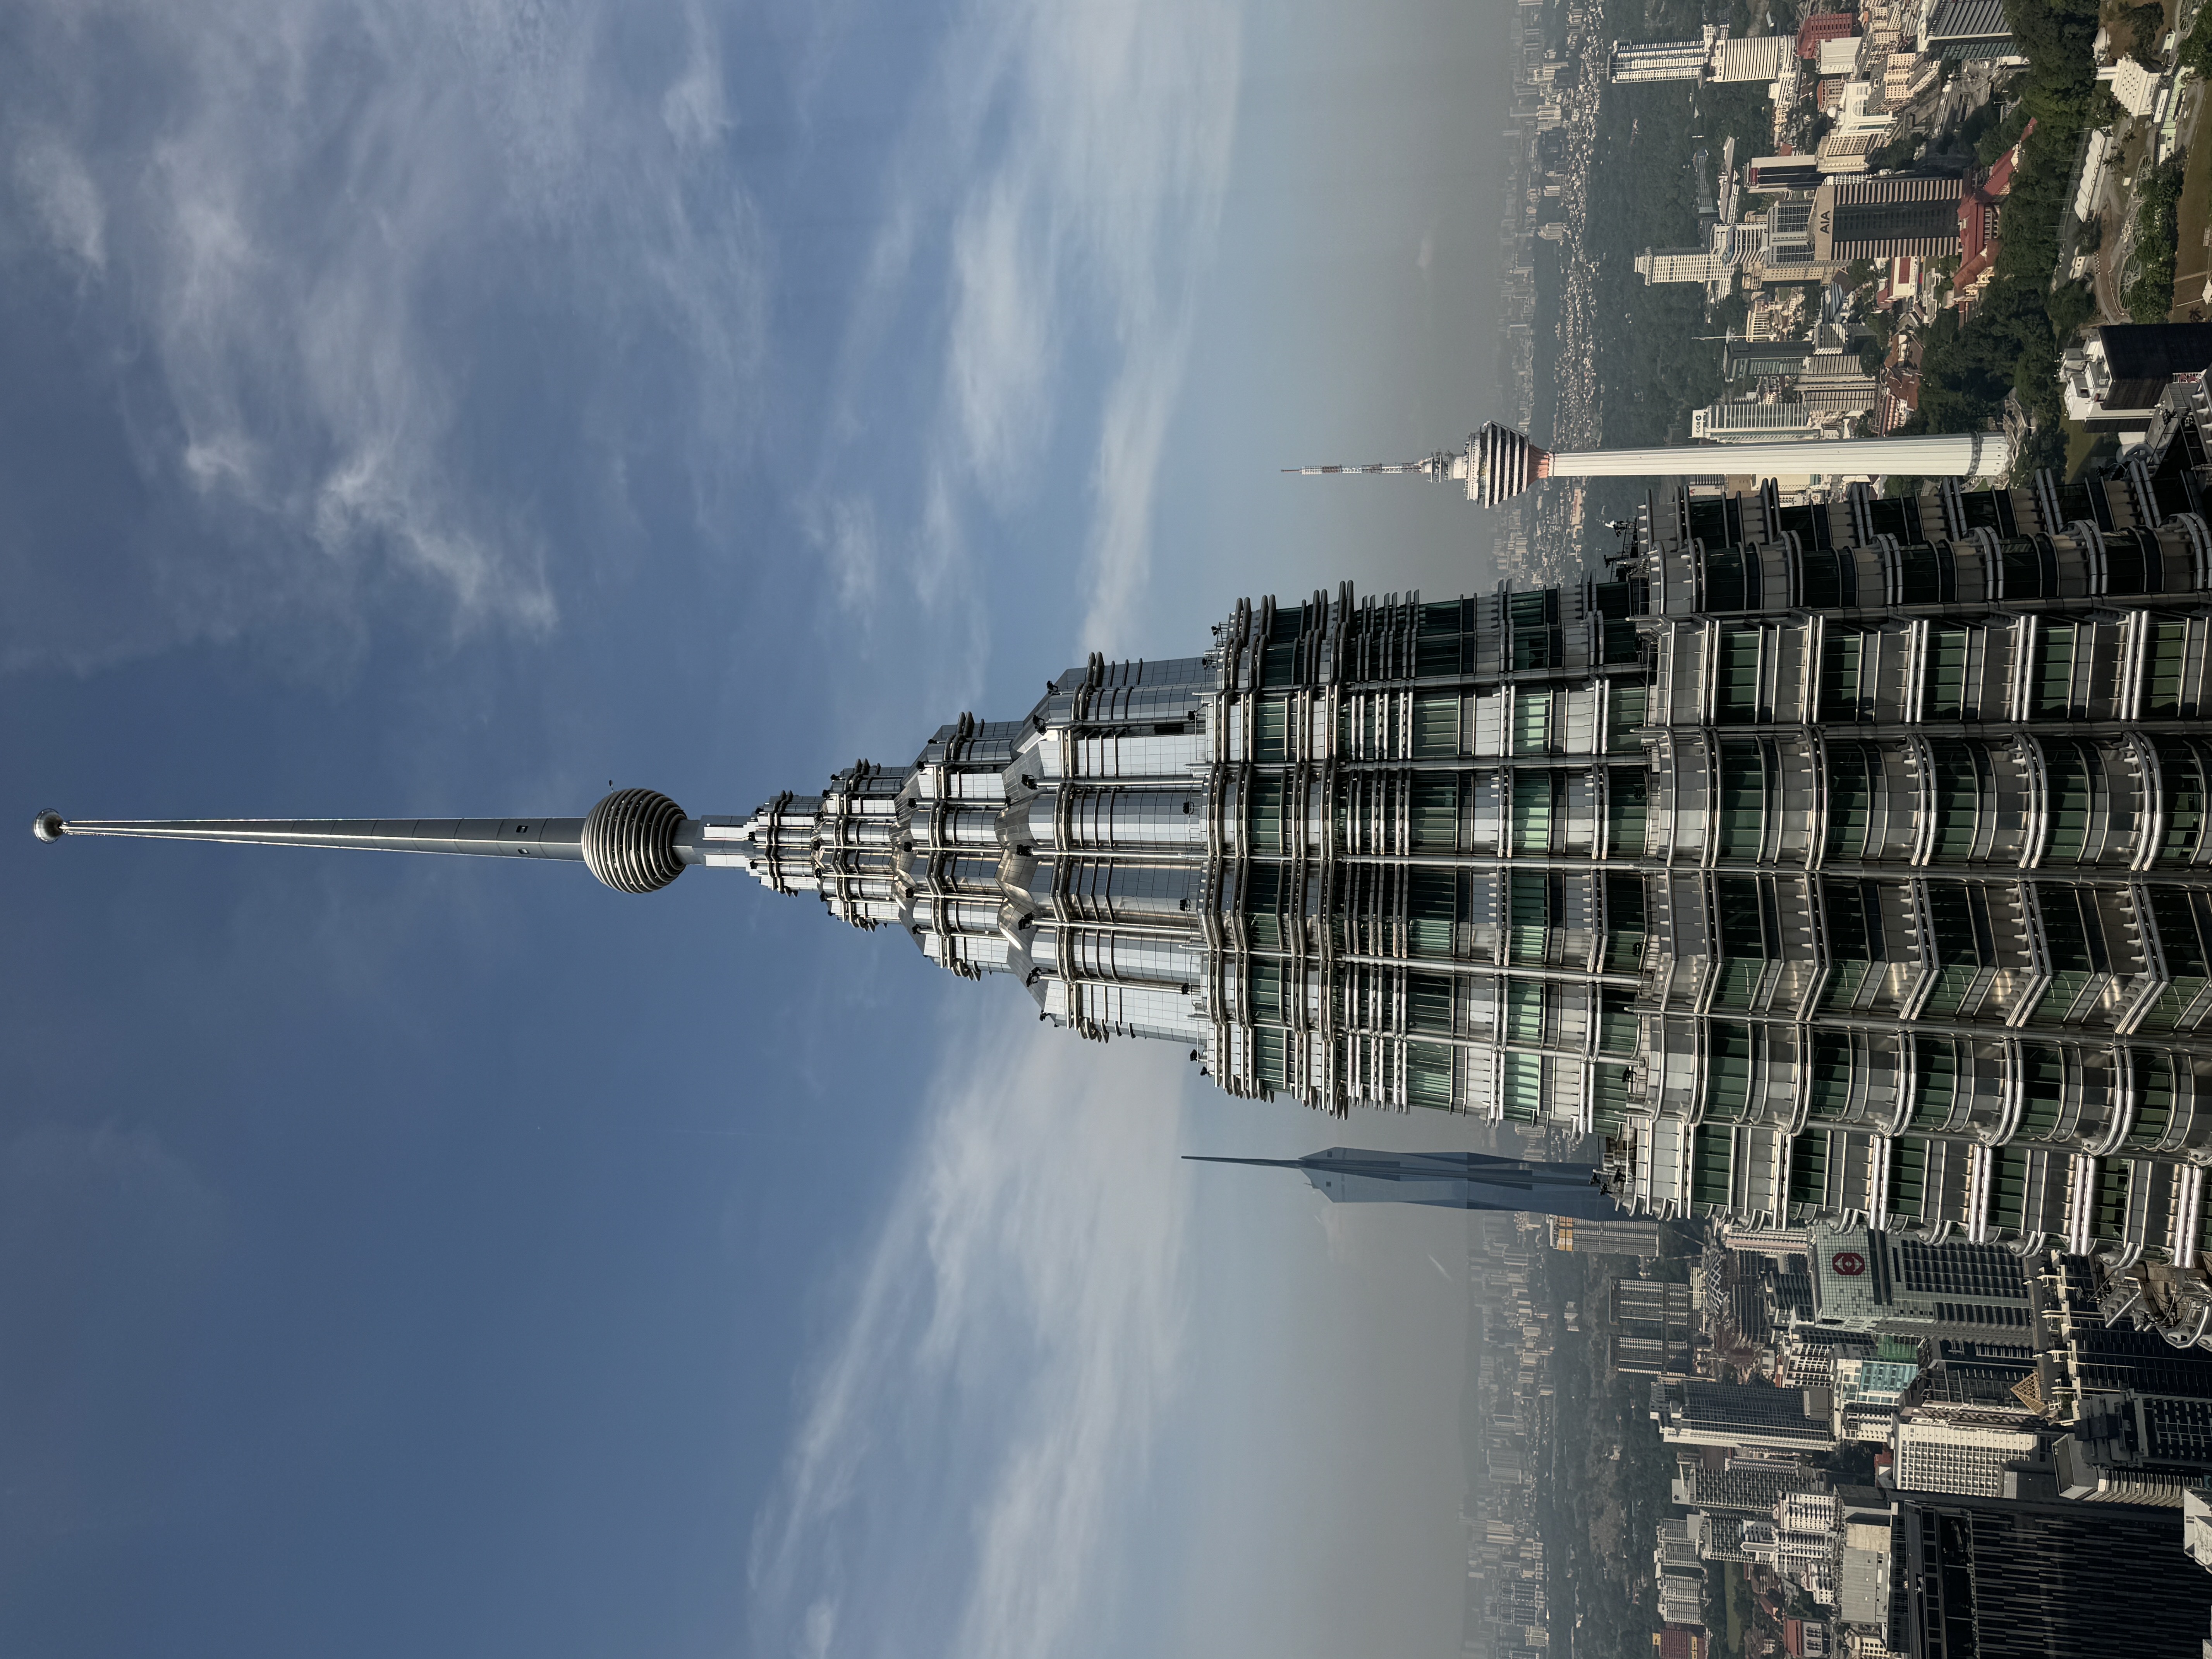 A close-up view of one of the Petronas Towers in Kuala Lumpur, Malaysia, highlighting its intricate architectural design and spire against a clear blue sky. The Kuala Lumpur Tower is visible in the background, along with the sprawling cityscape below. This image captures the modern and iconic skyline of the Malaysian capital.